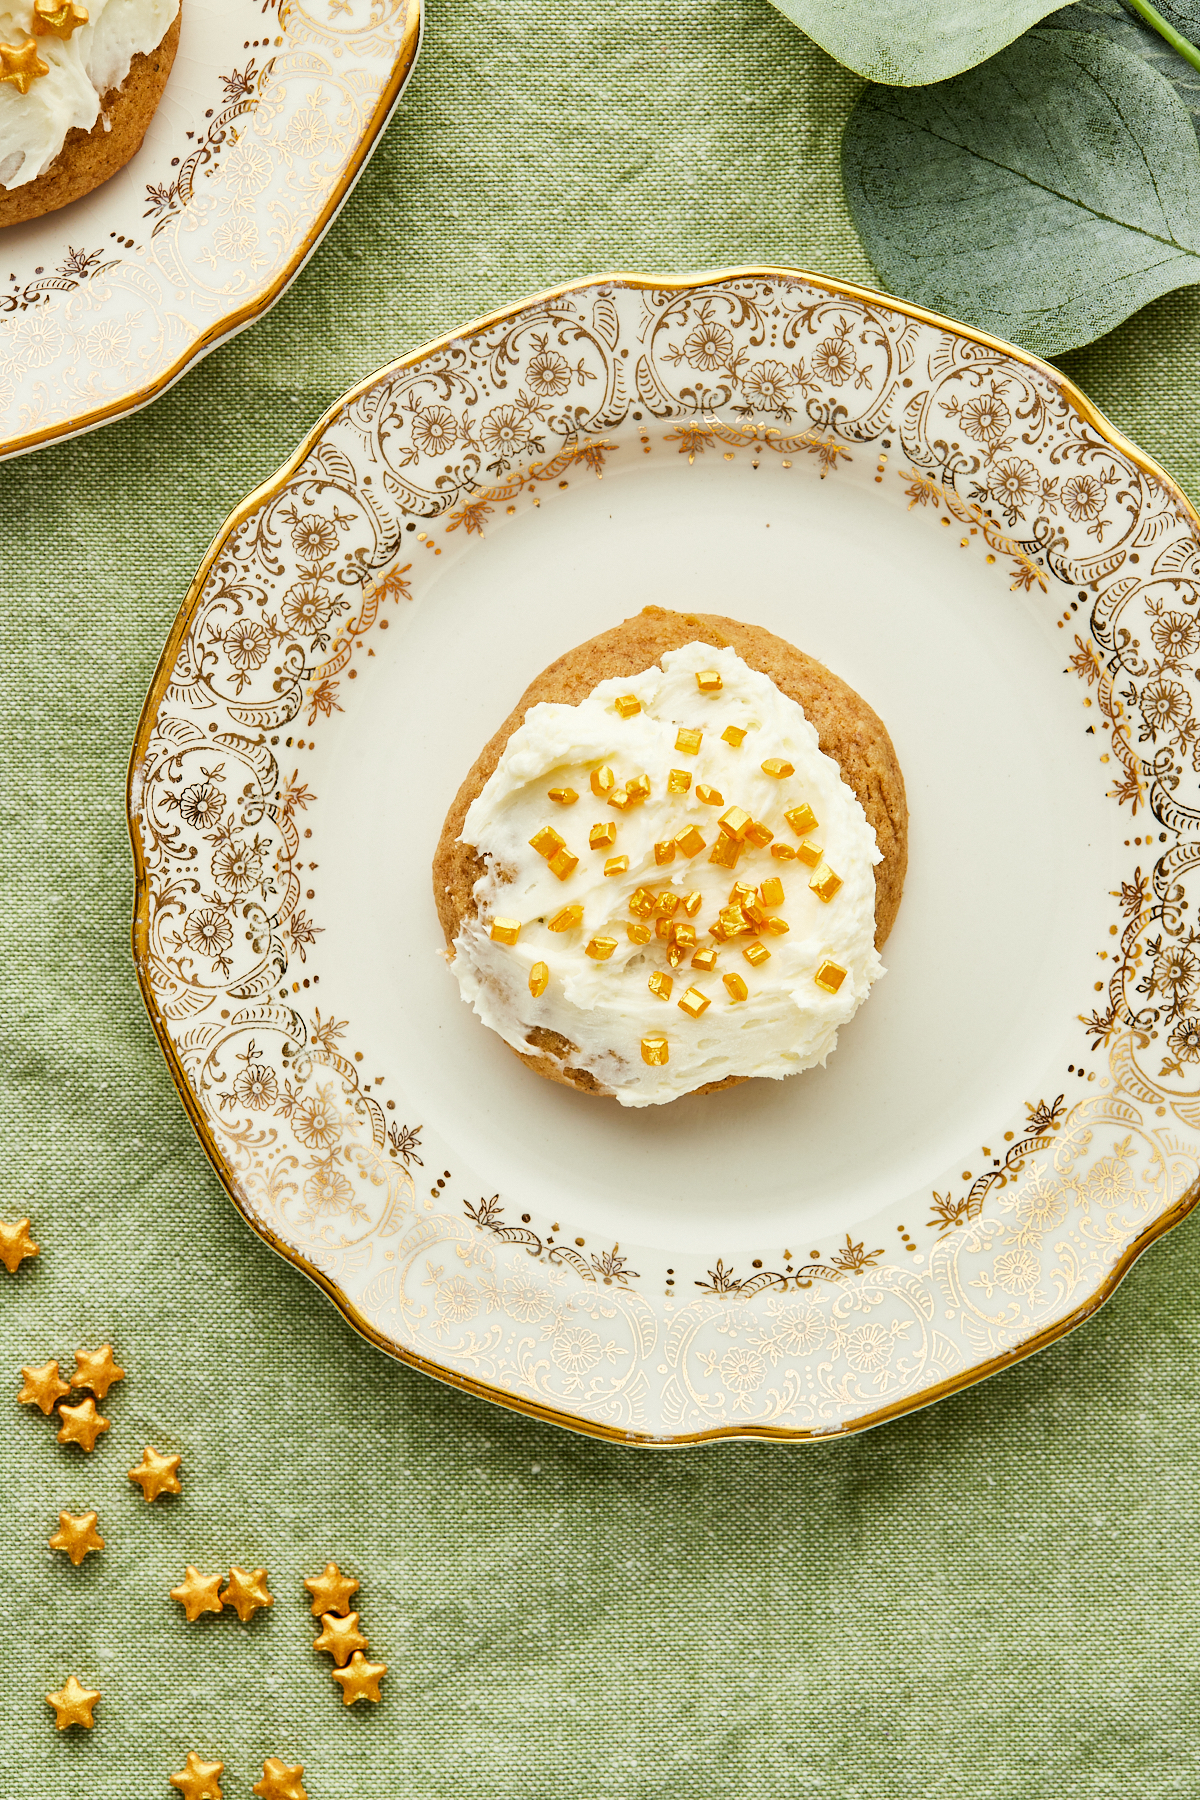 A frosted eggnog cookie with gold sprinkles on a gold rimmed plate on a green tablecloth.